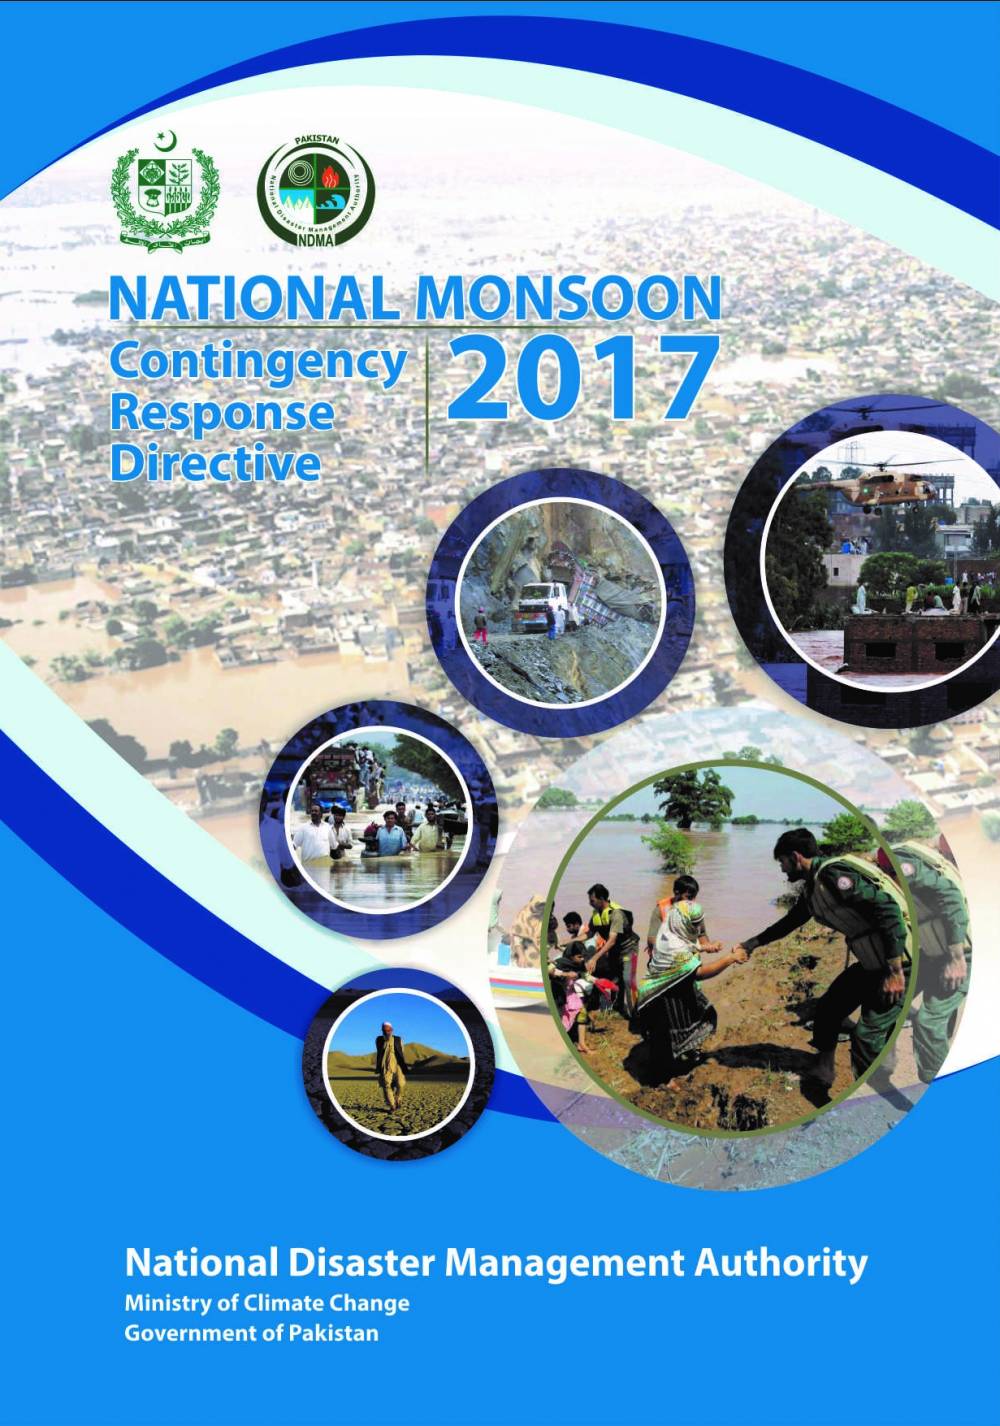 National Monsoon Contingency Response Directive 2017